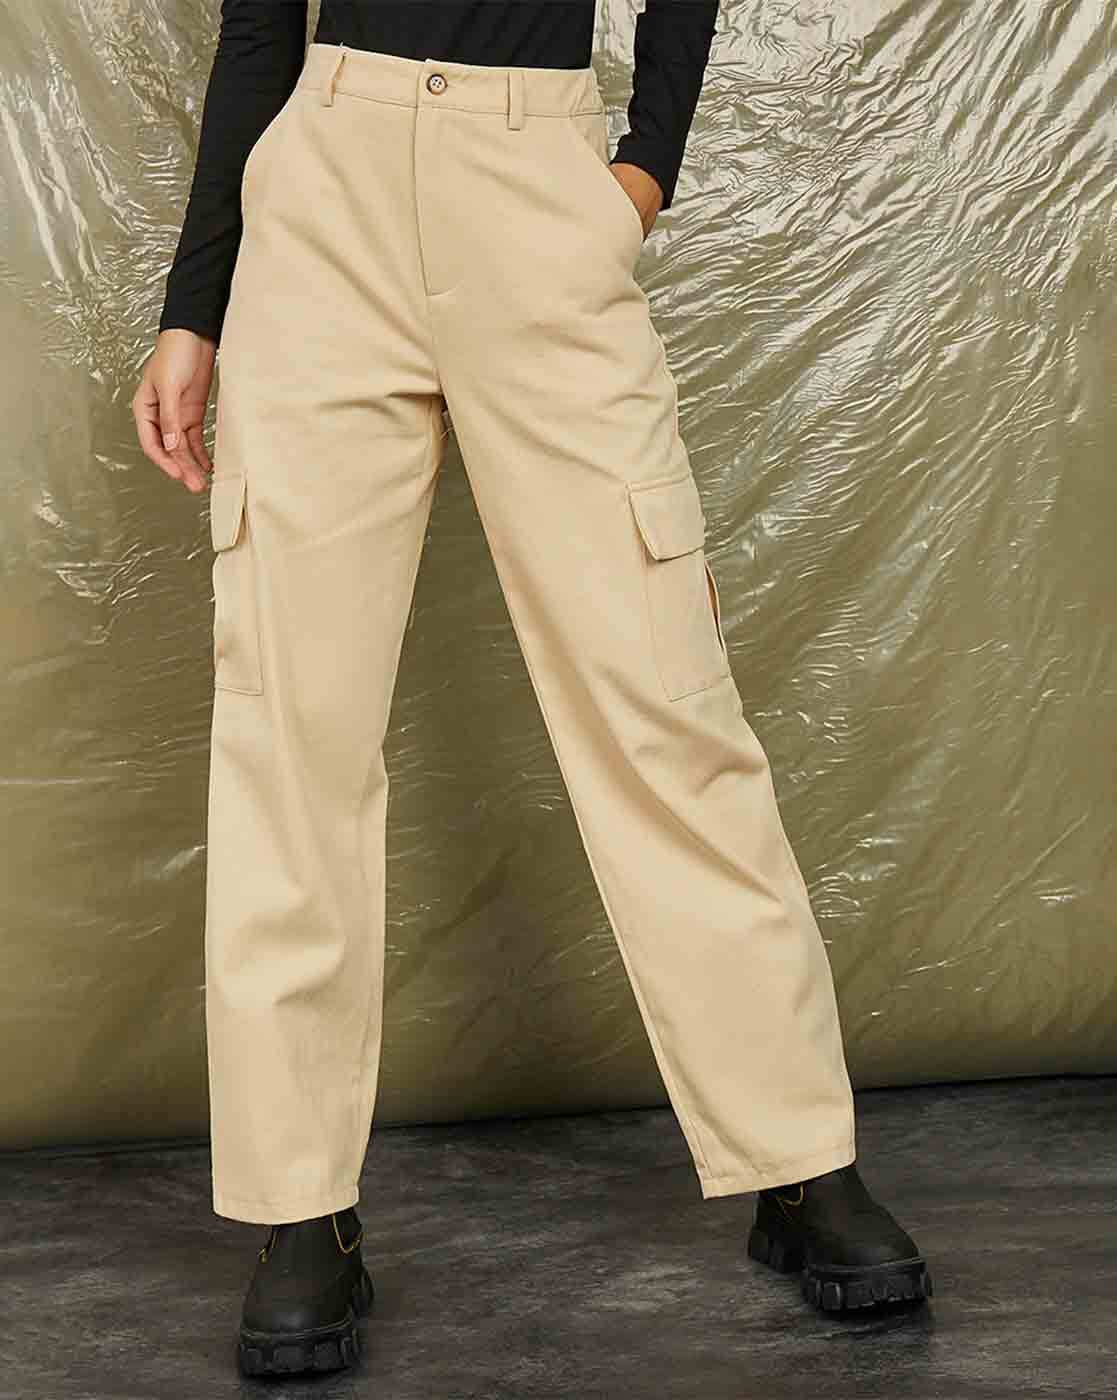 HM Woman Canvas cargo trousers Price in India Full Specifications   Offers  DTashioncom